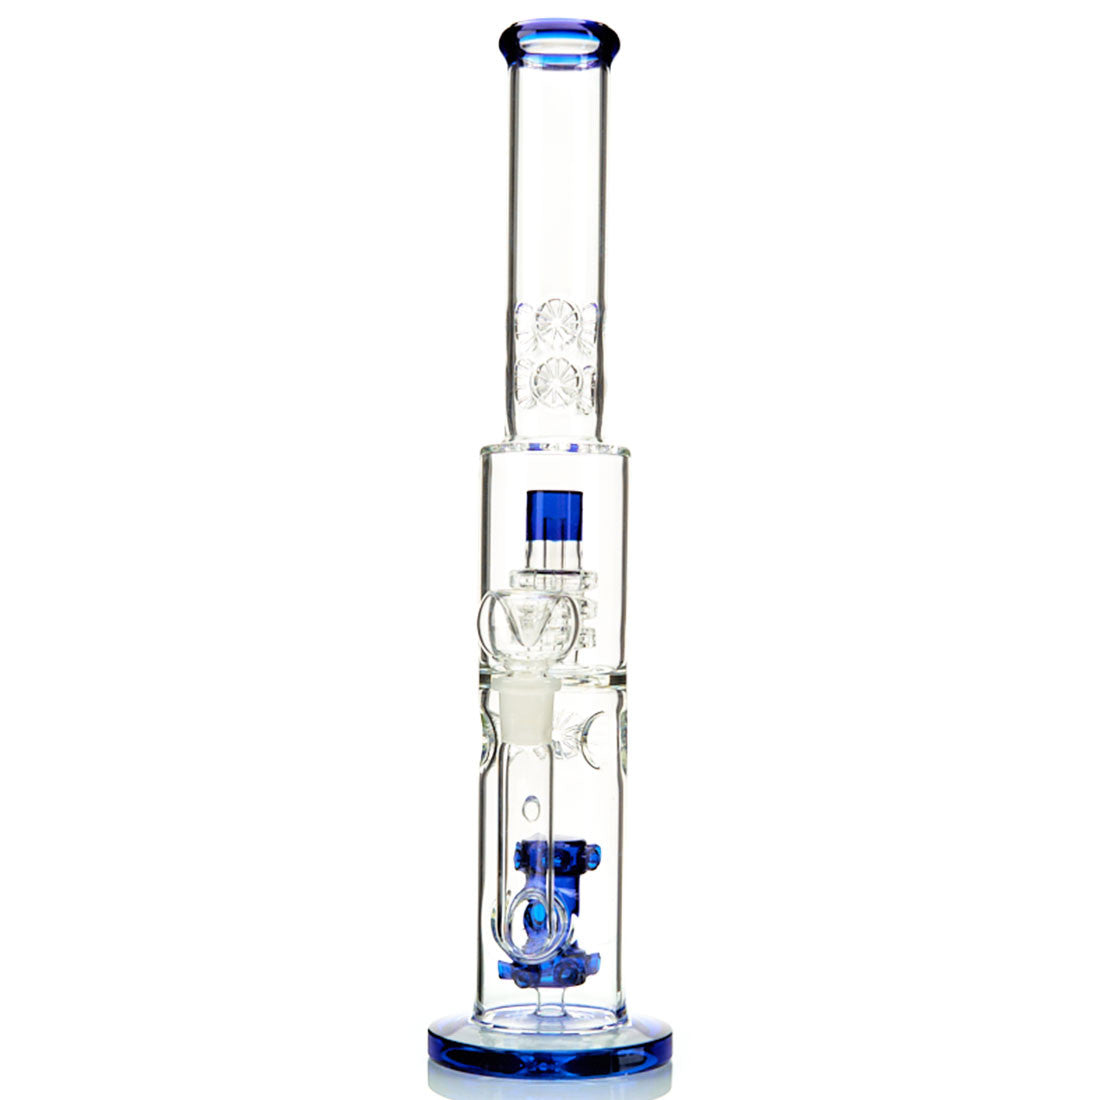 Waterpipe Accessories – Tagged Cone Piece – Cloud 9 Smoke Shop